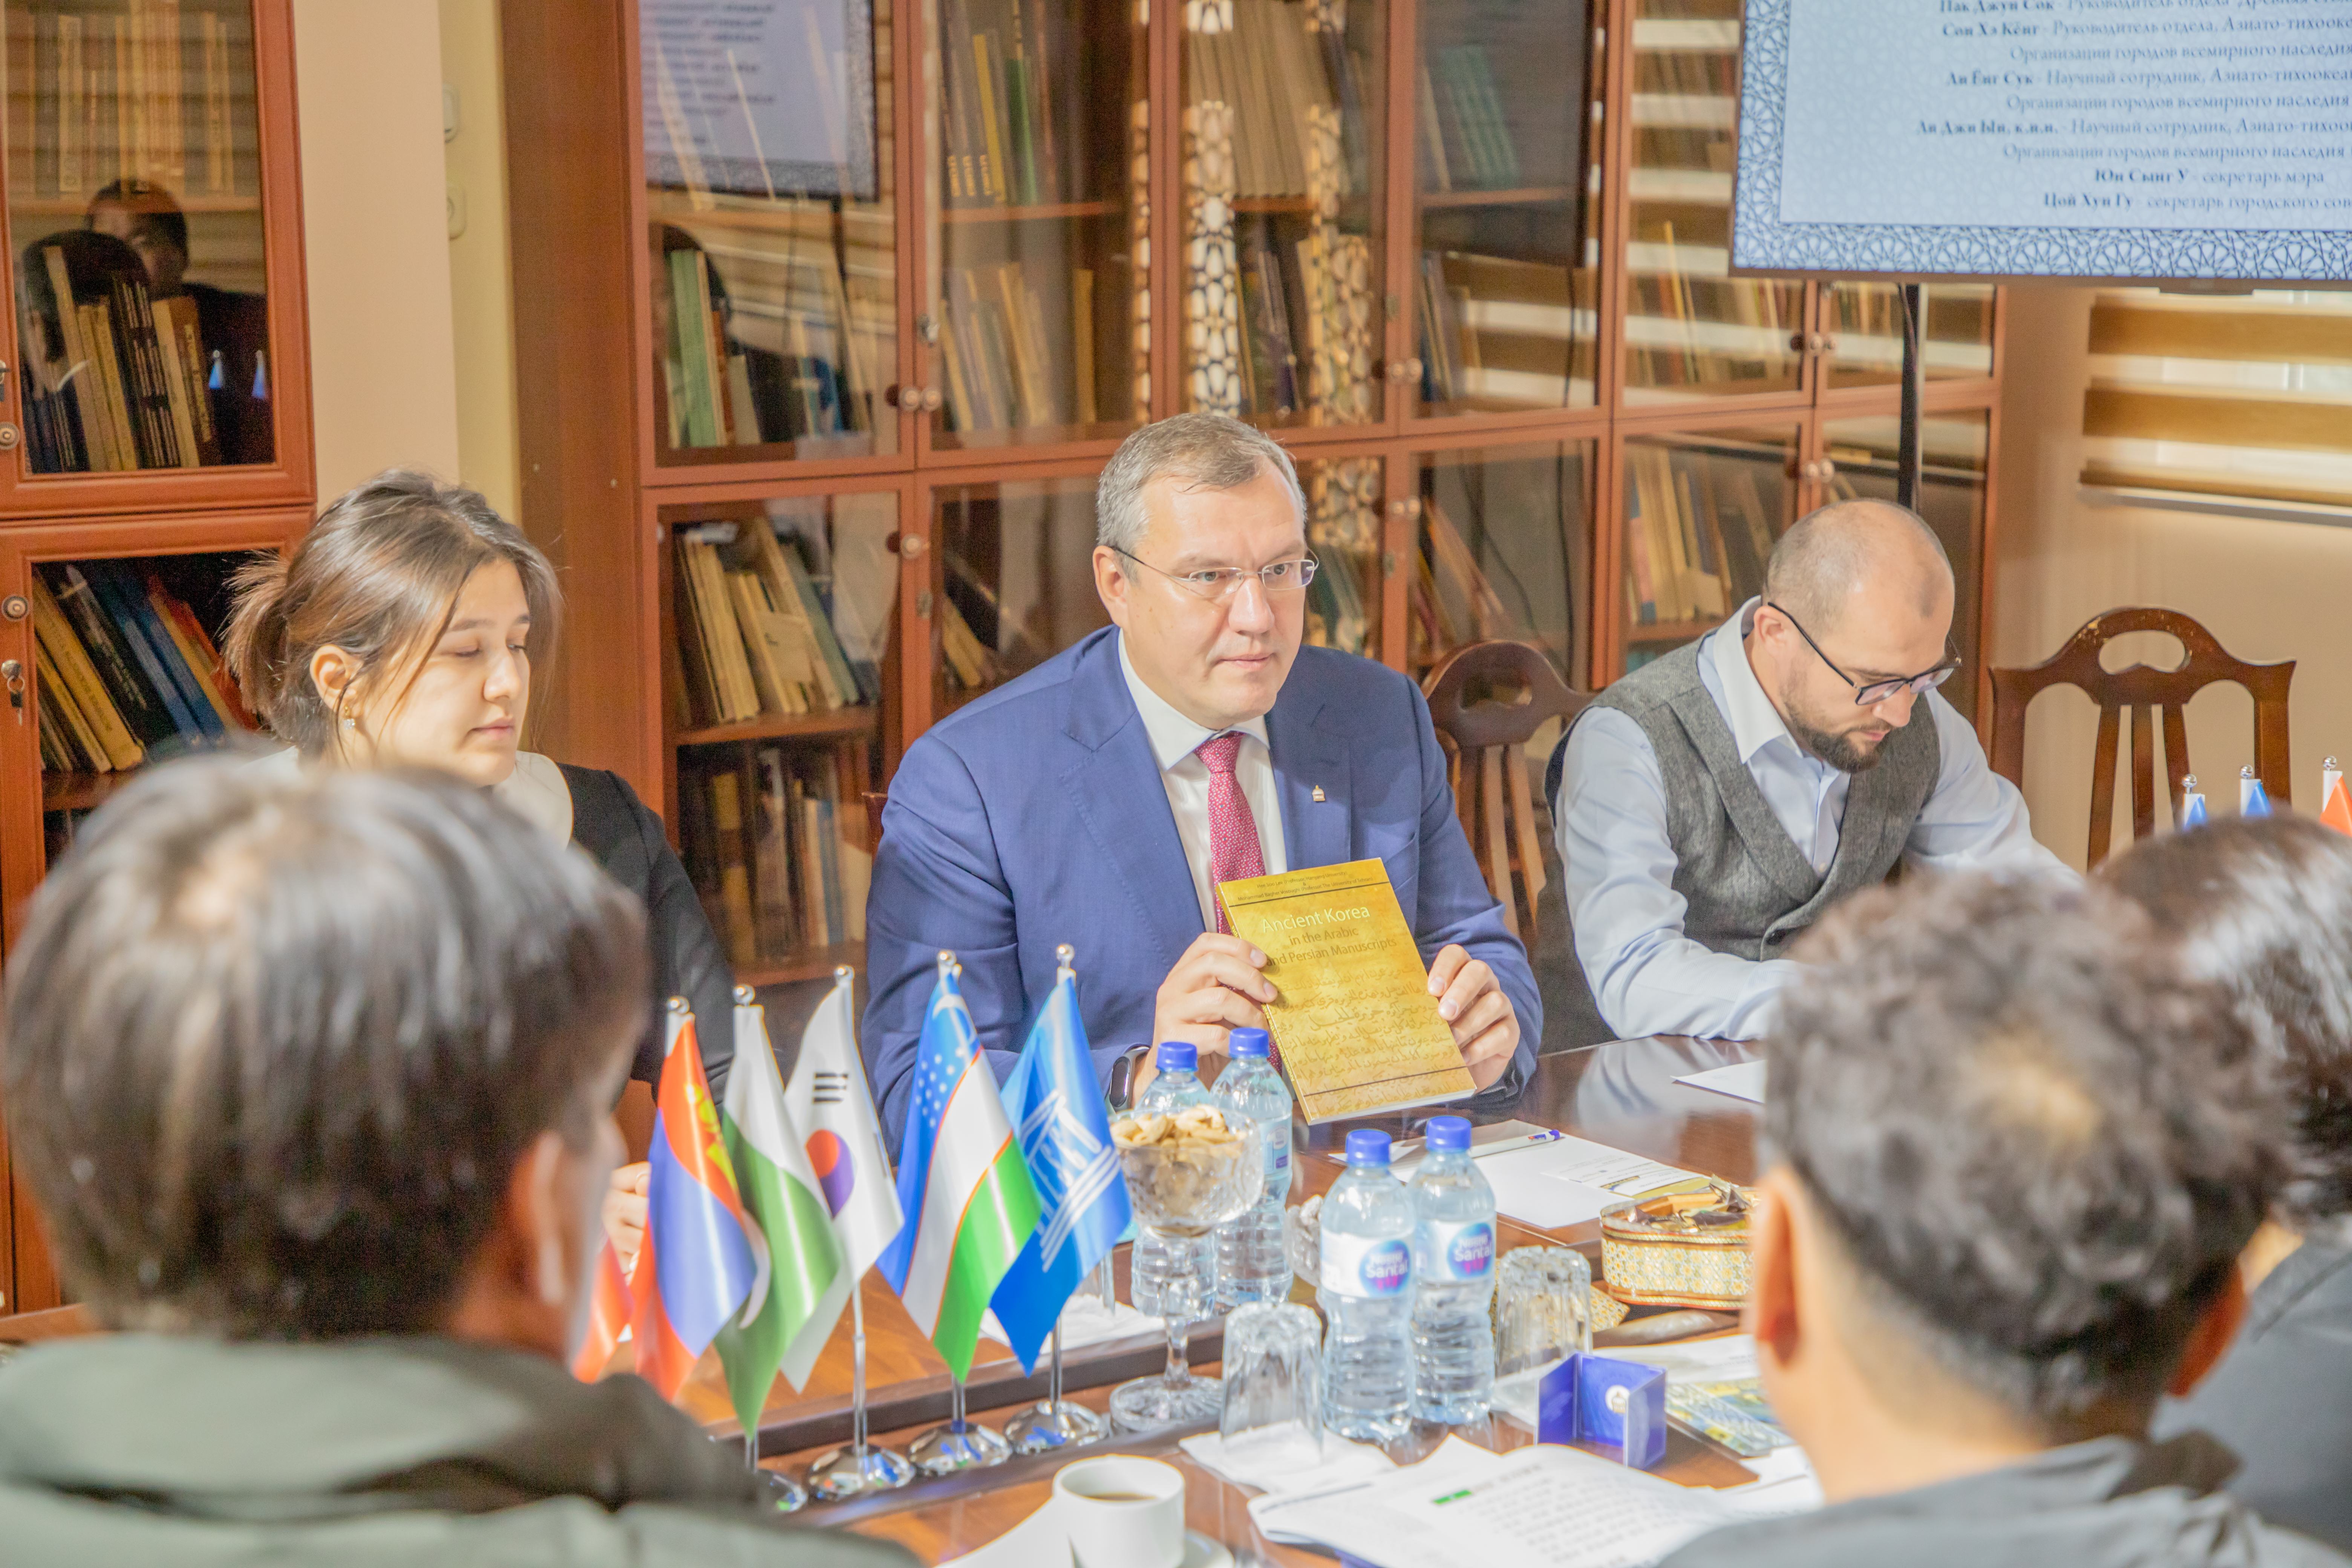 A delegation of the Asia-Pacific Secretariat of the Organization of World Heritage Cities (OWHC)  paid an official visit to the headquarters of the IICAS